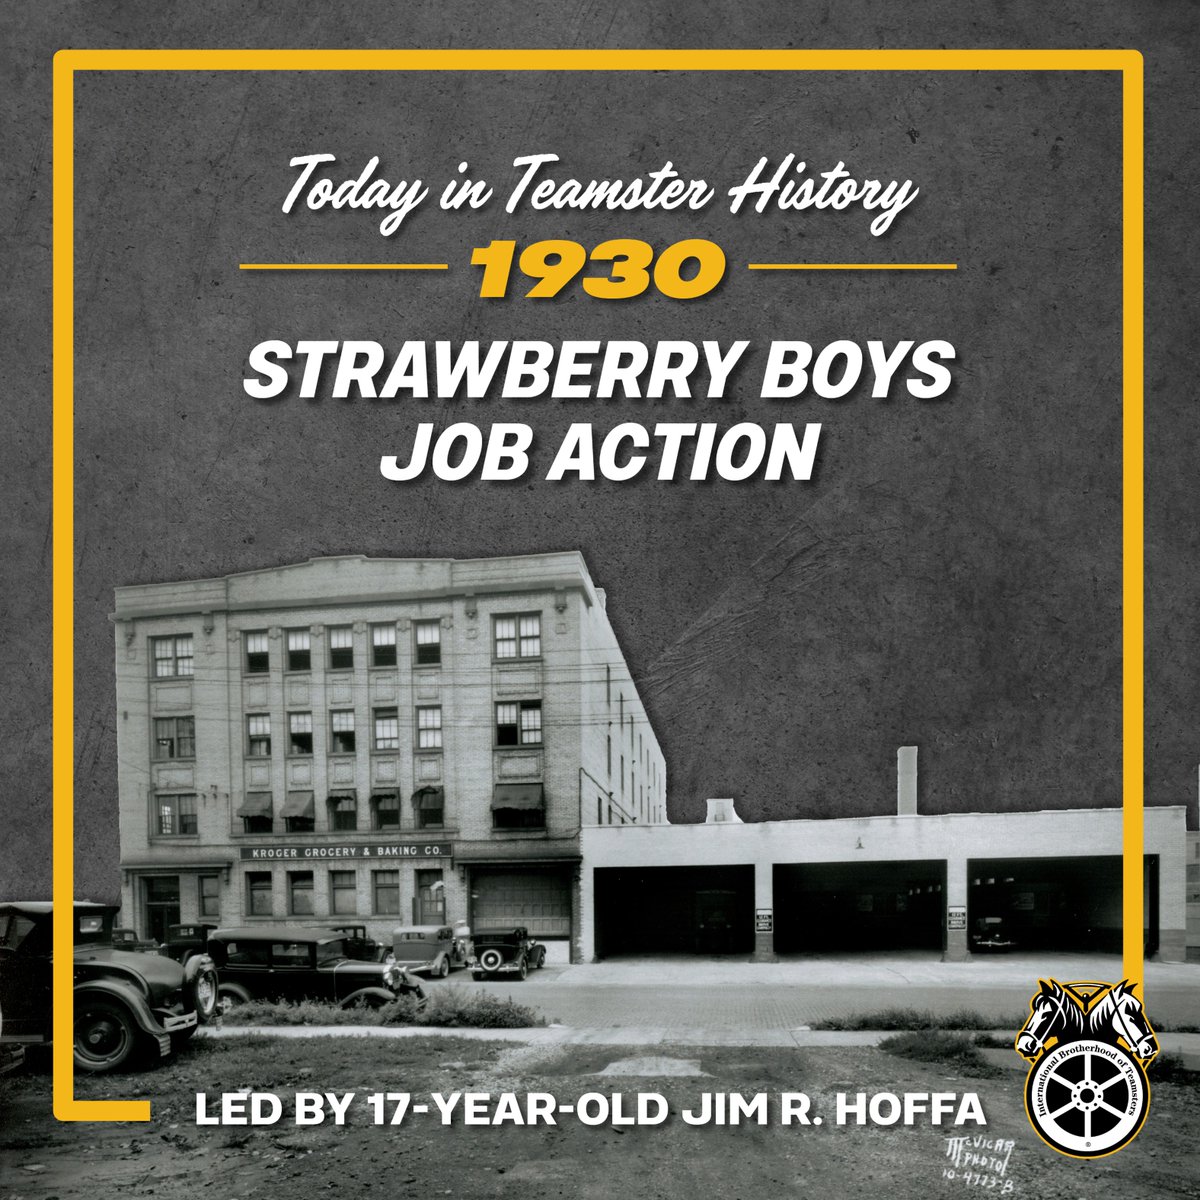 #OTD April 13, 1930: A 17-year-old James R. Hoffa led his co-workers at a Kroger warehouse in Clinton, Indiana, in a successful job action. By refusing to unload a shipment of perishable strawberries, they forced the company to give in to their demands. #1u #Teamsters 🍓✊